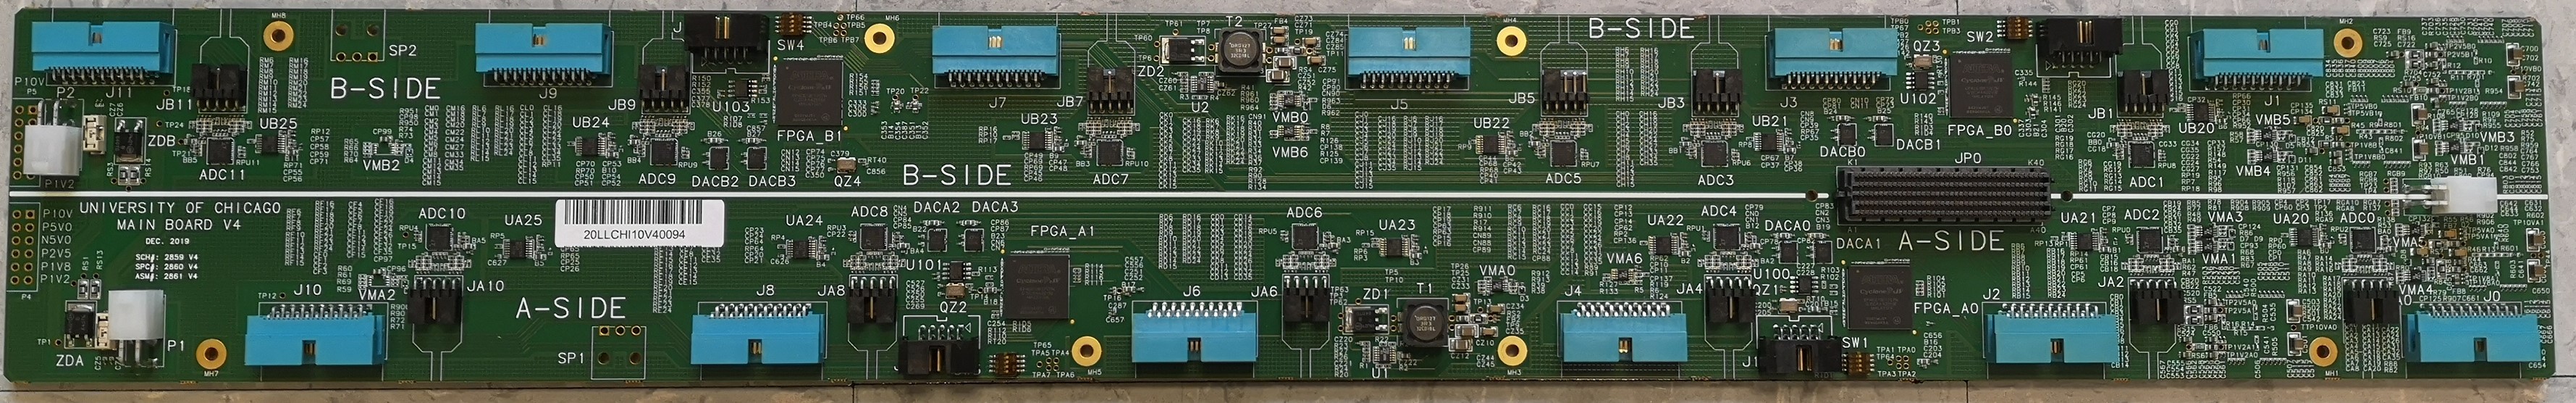 Picture of top of MBV4 board